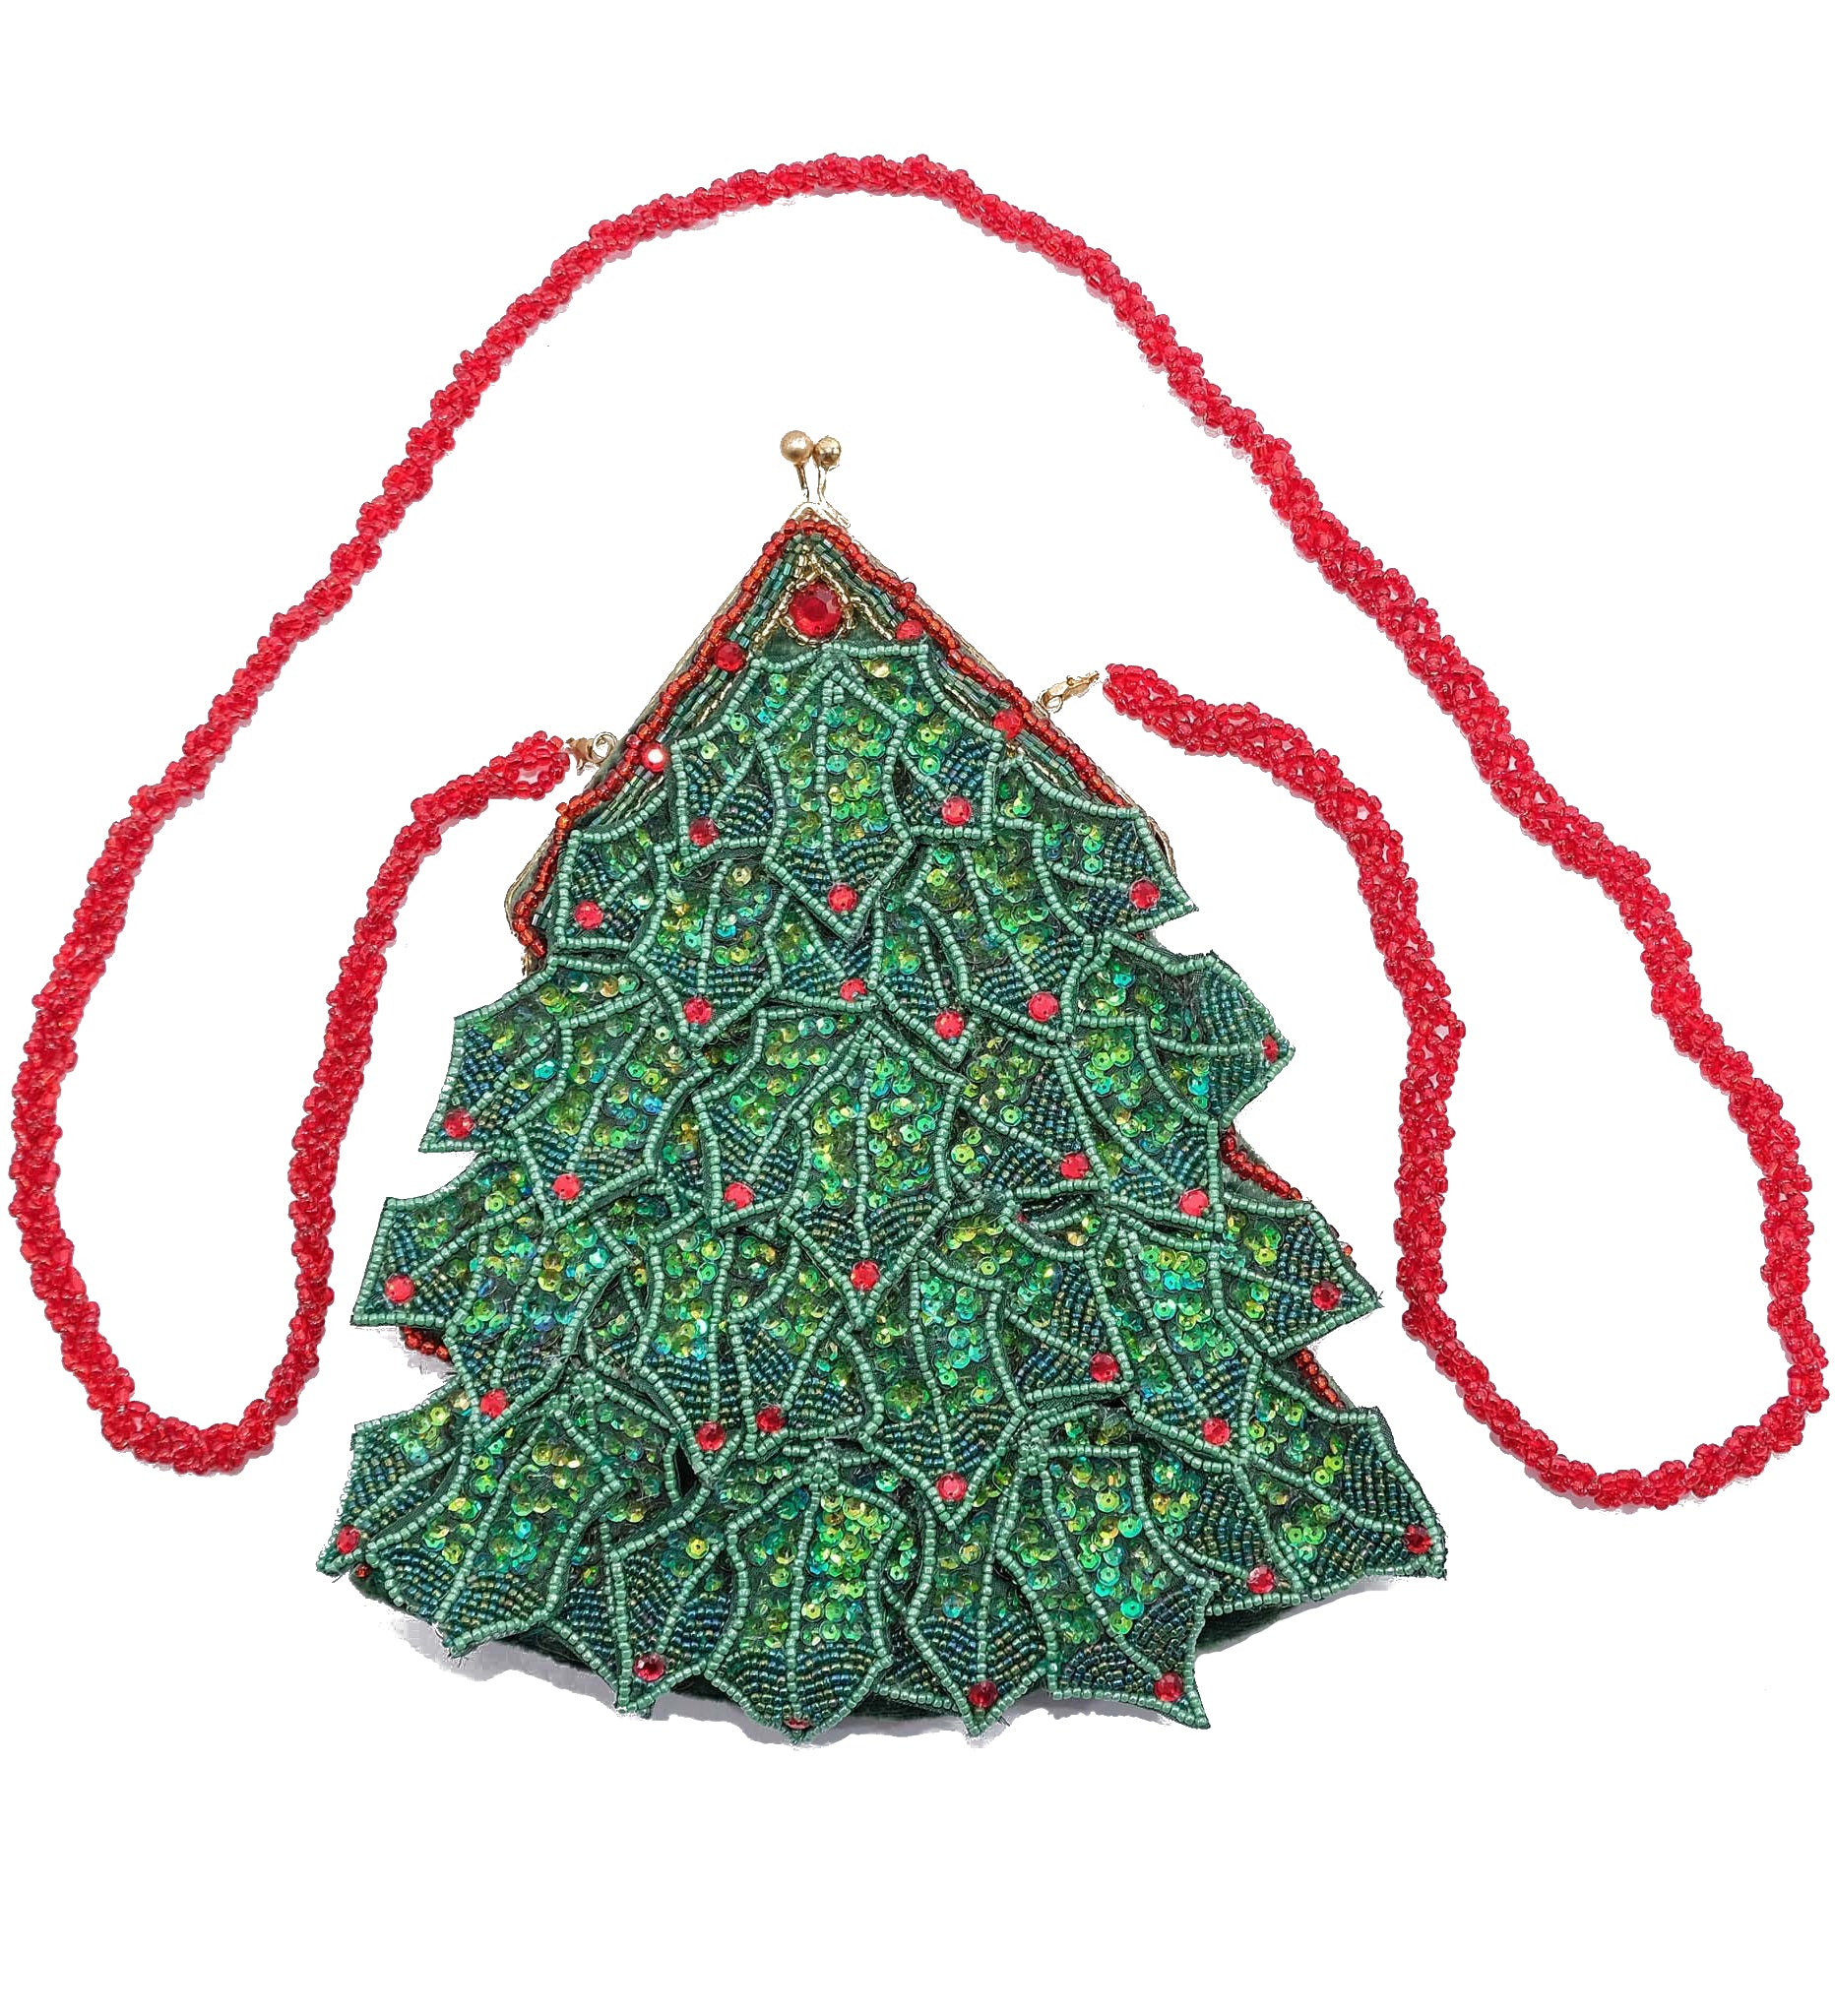  Christmas Tree Purse by Katherine's Collection